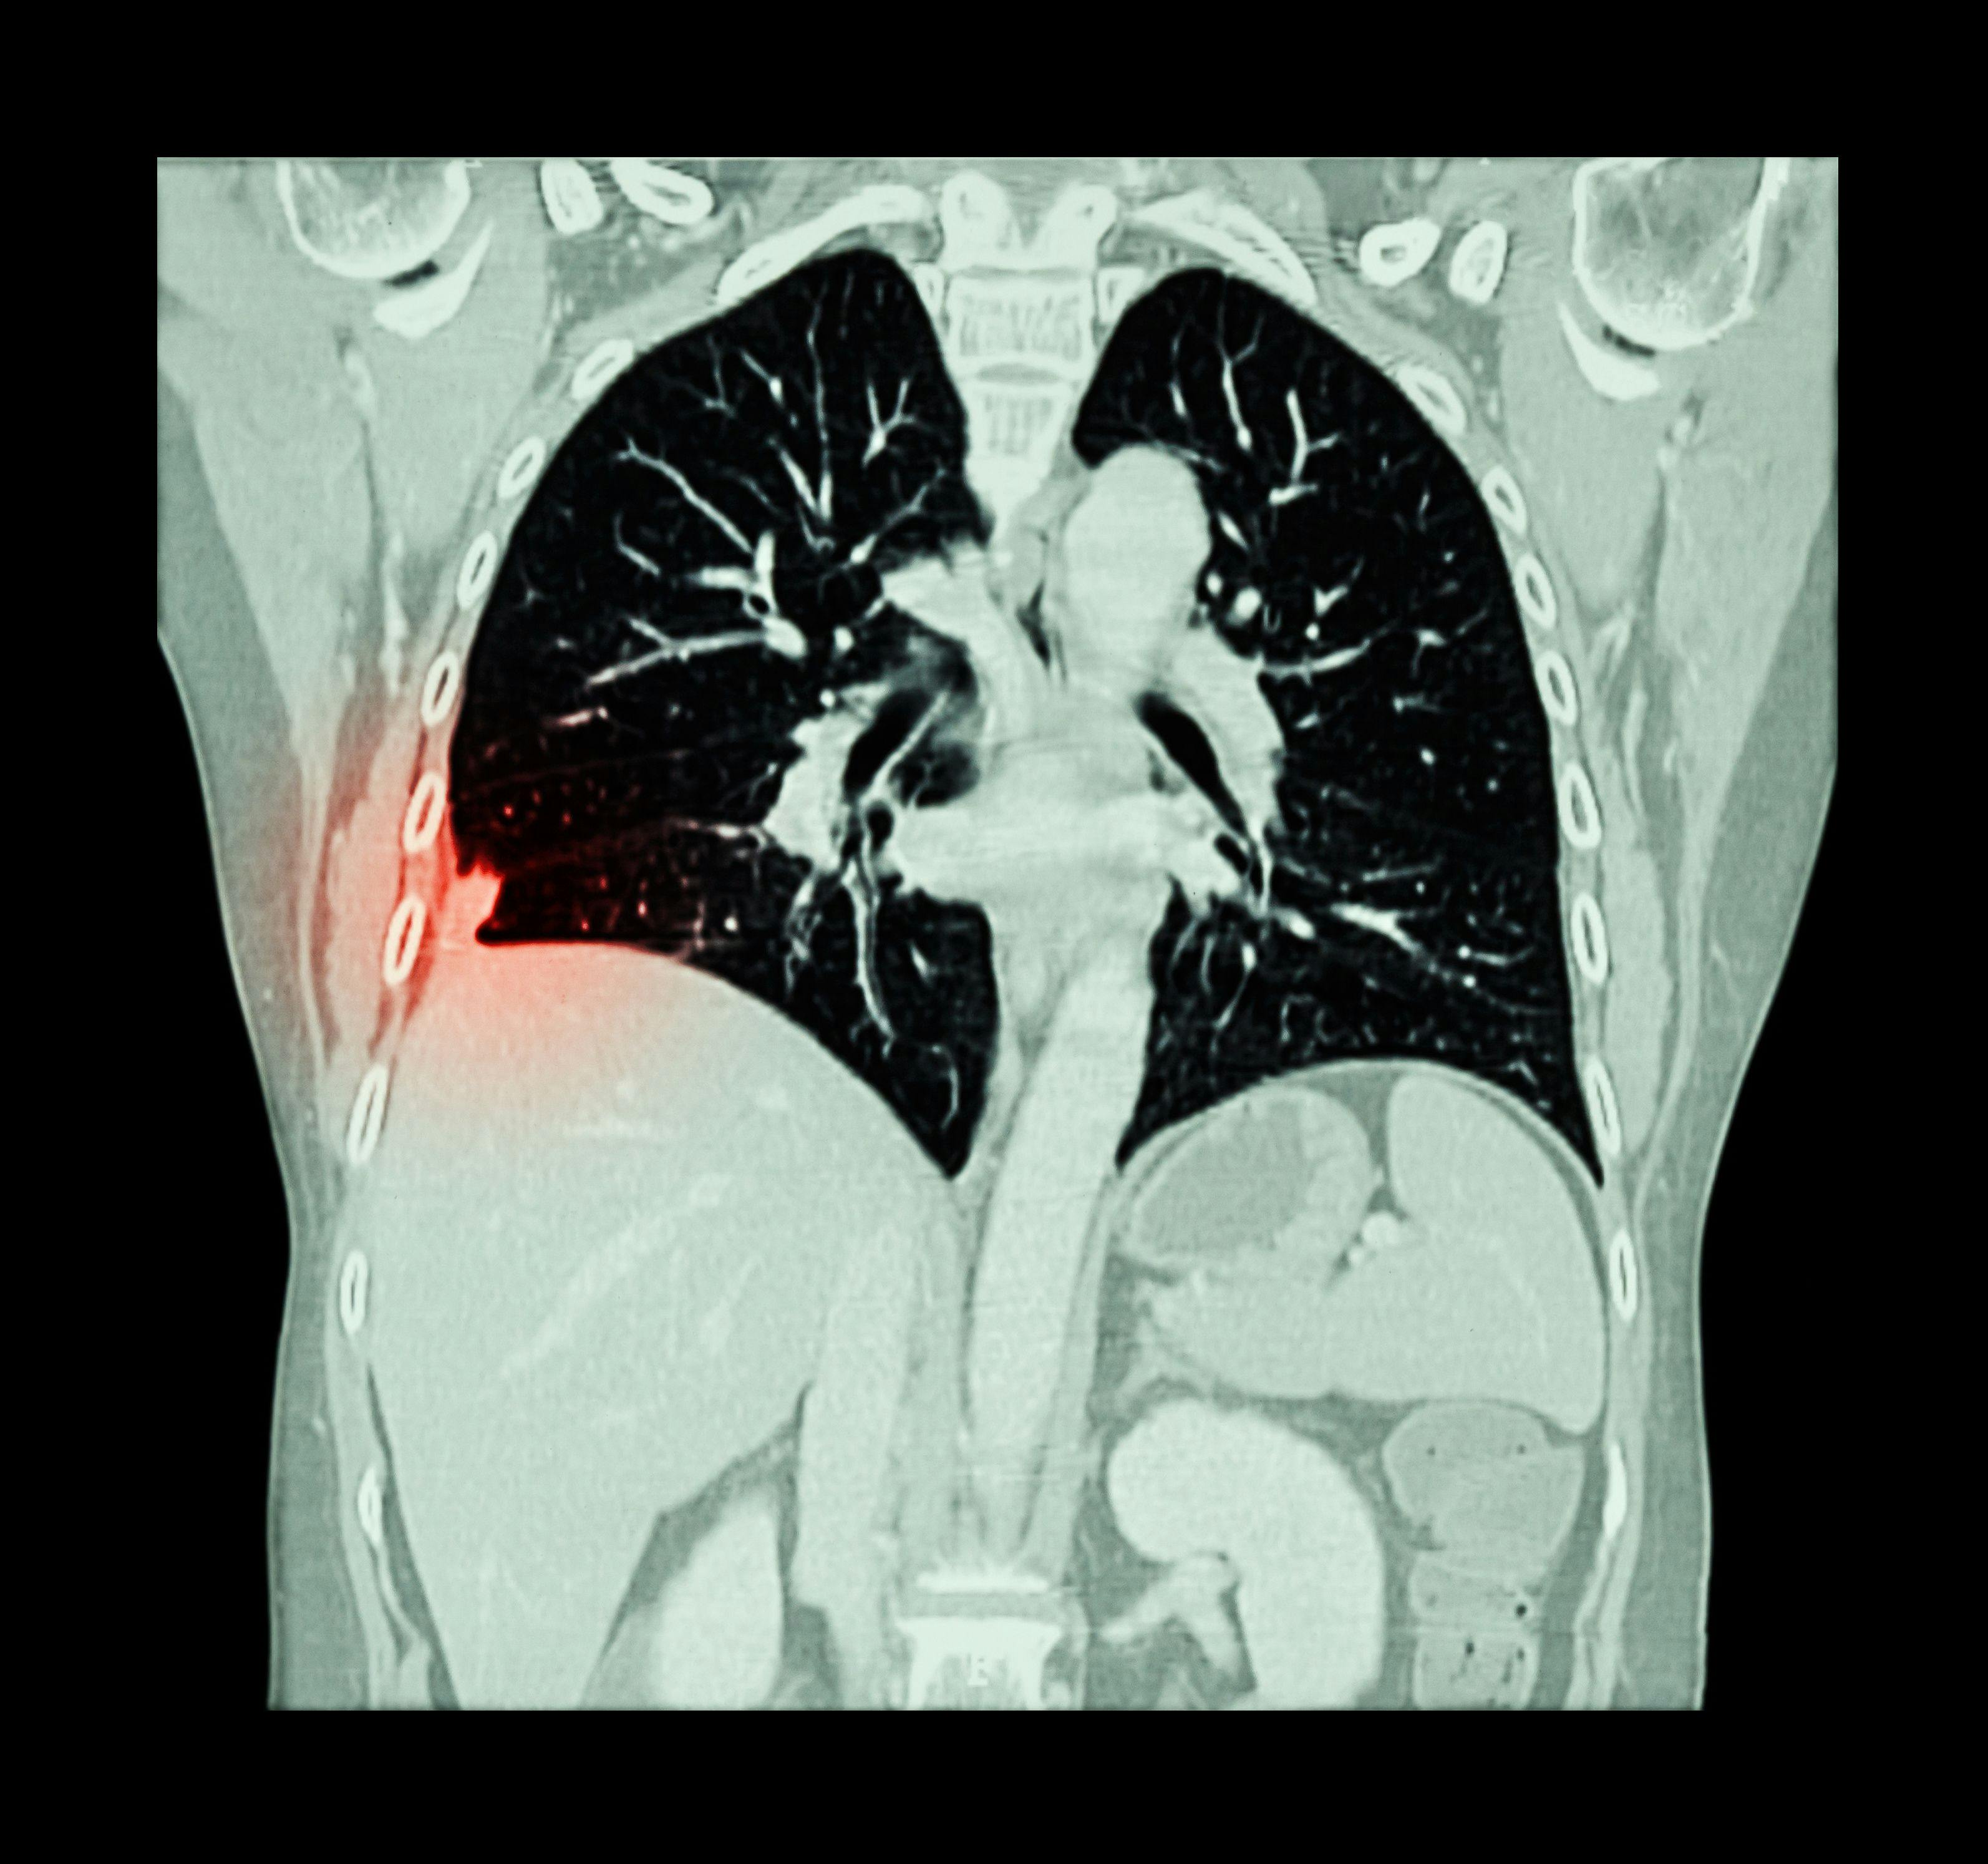 Community-Based Intervention May Increase Lung Cancer Screening 